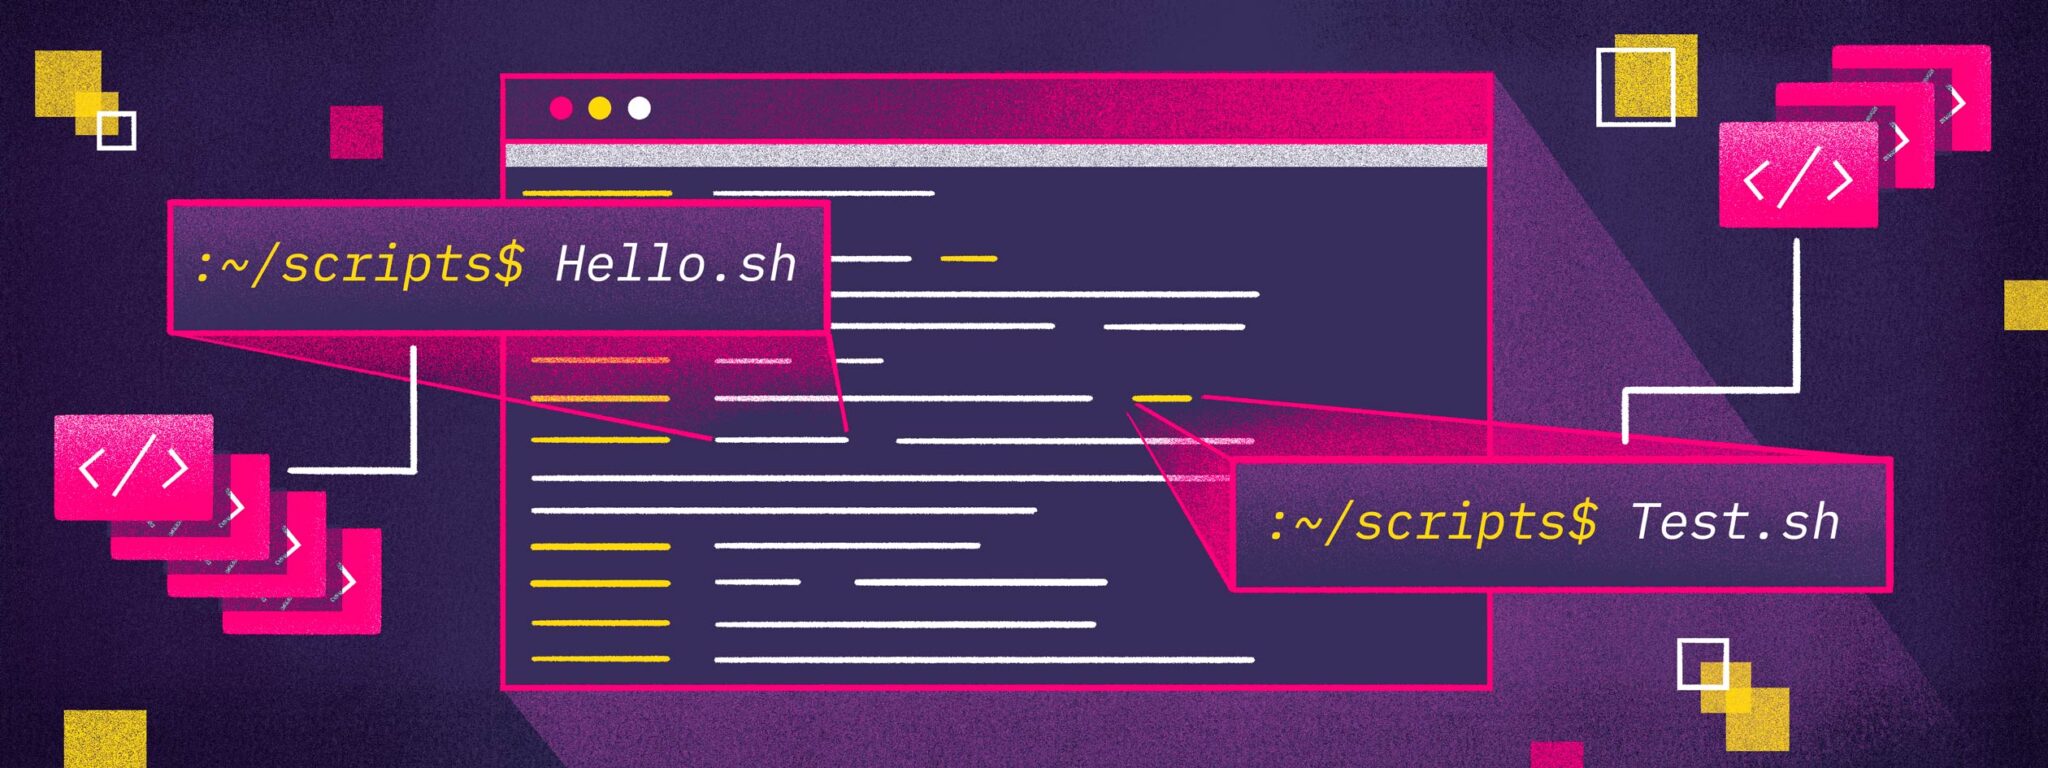 Illustrated image of a computer screen on a purple background with callouts related to bash scripting.